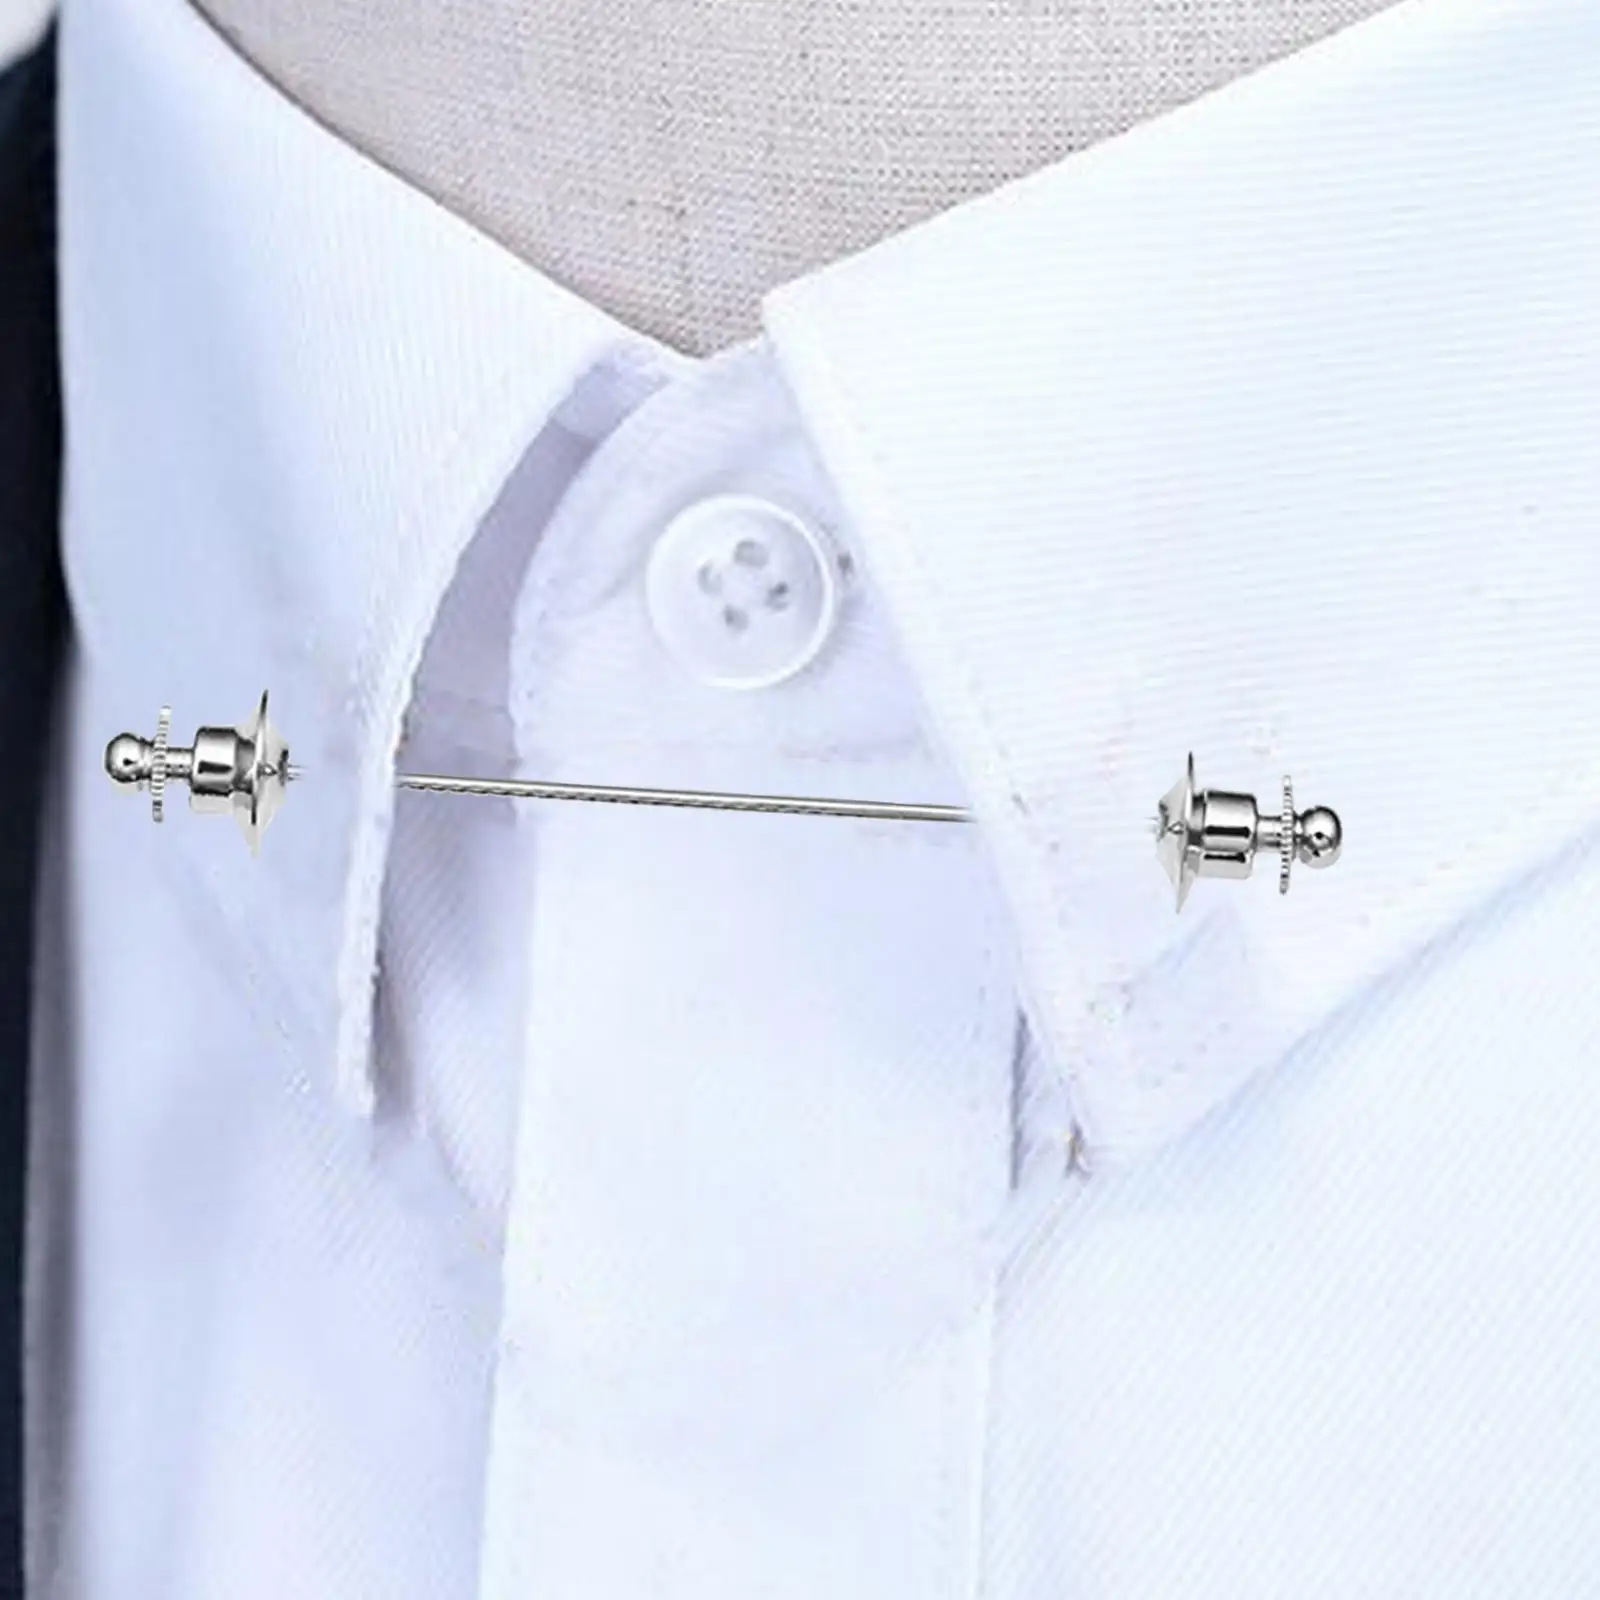 Fashion Shirt Collar Bar Tie Pin for Men Copper Accessories Suit Brooch for Business